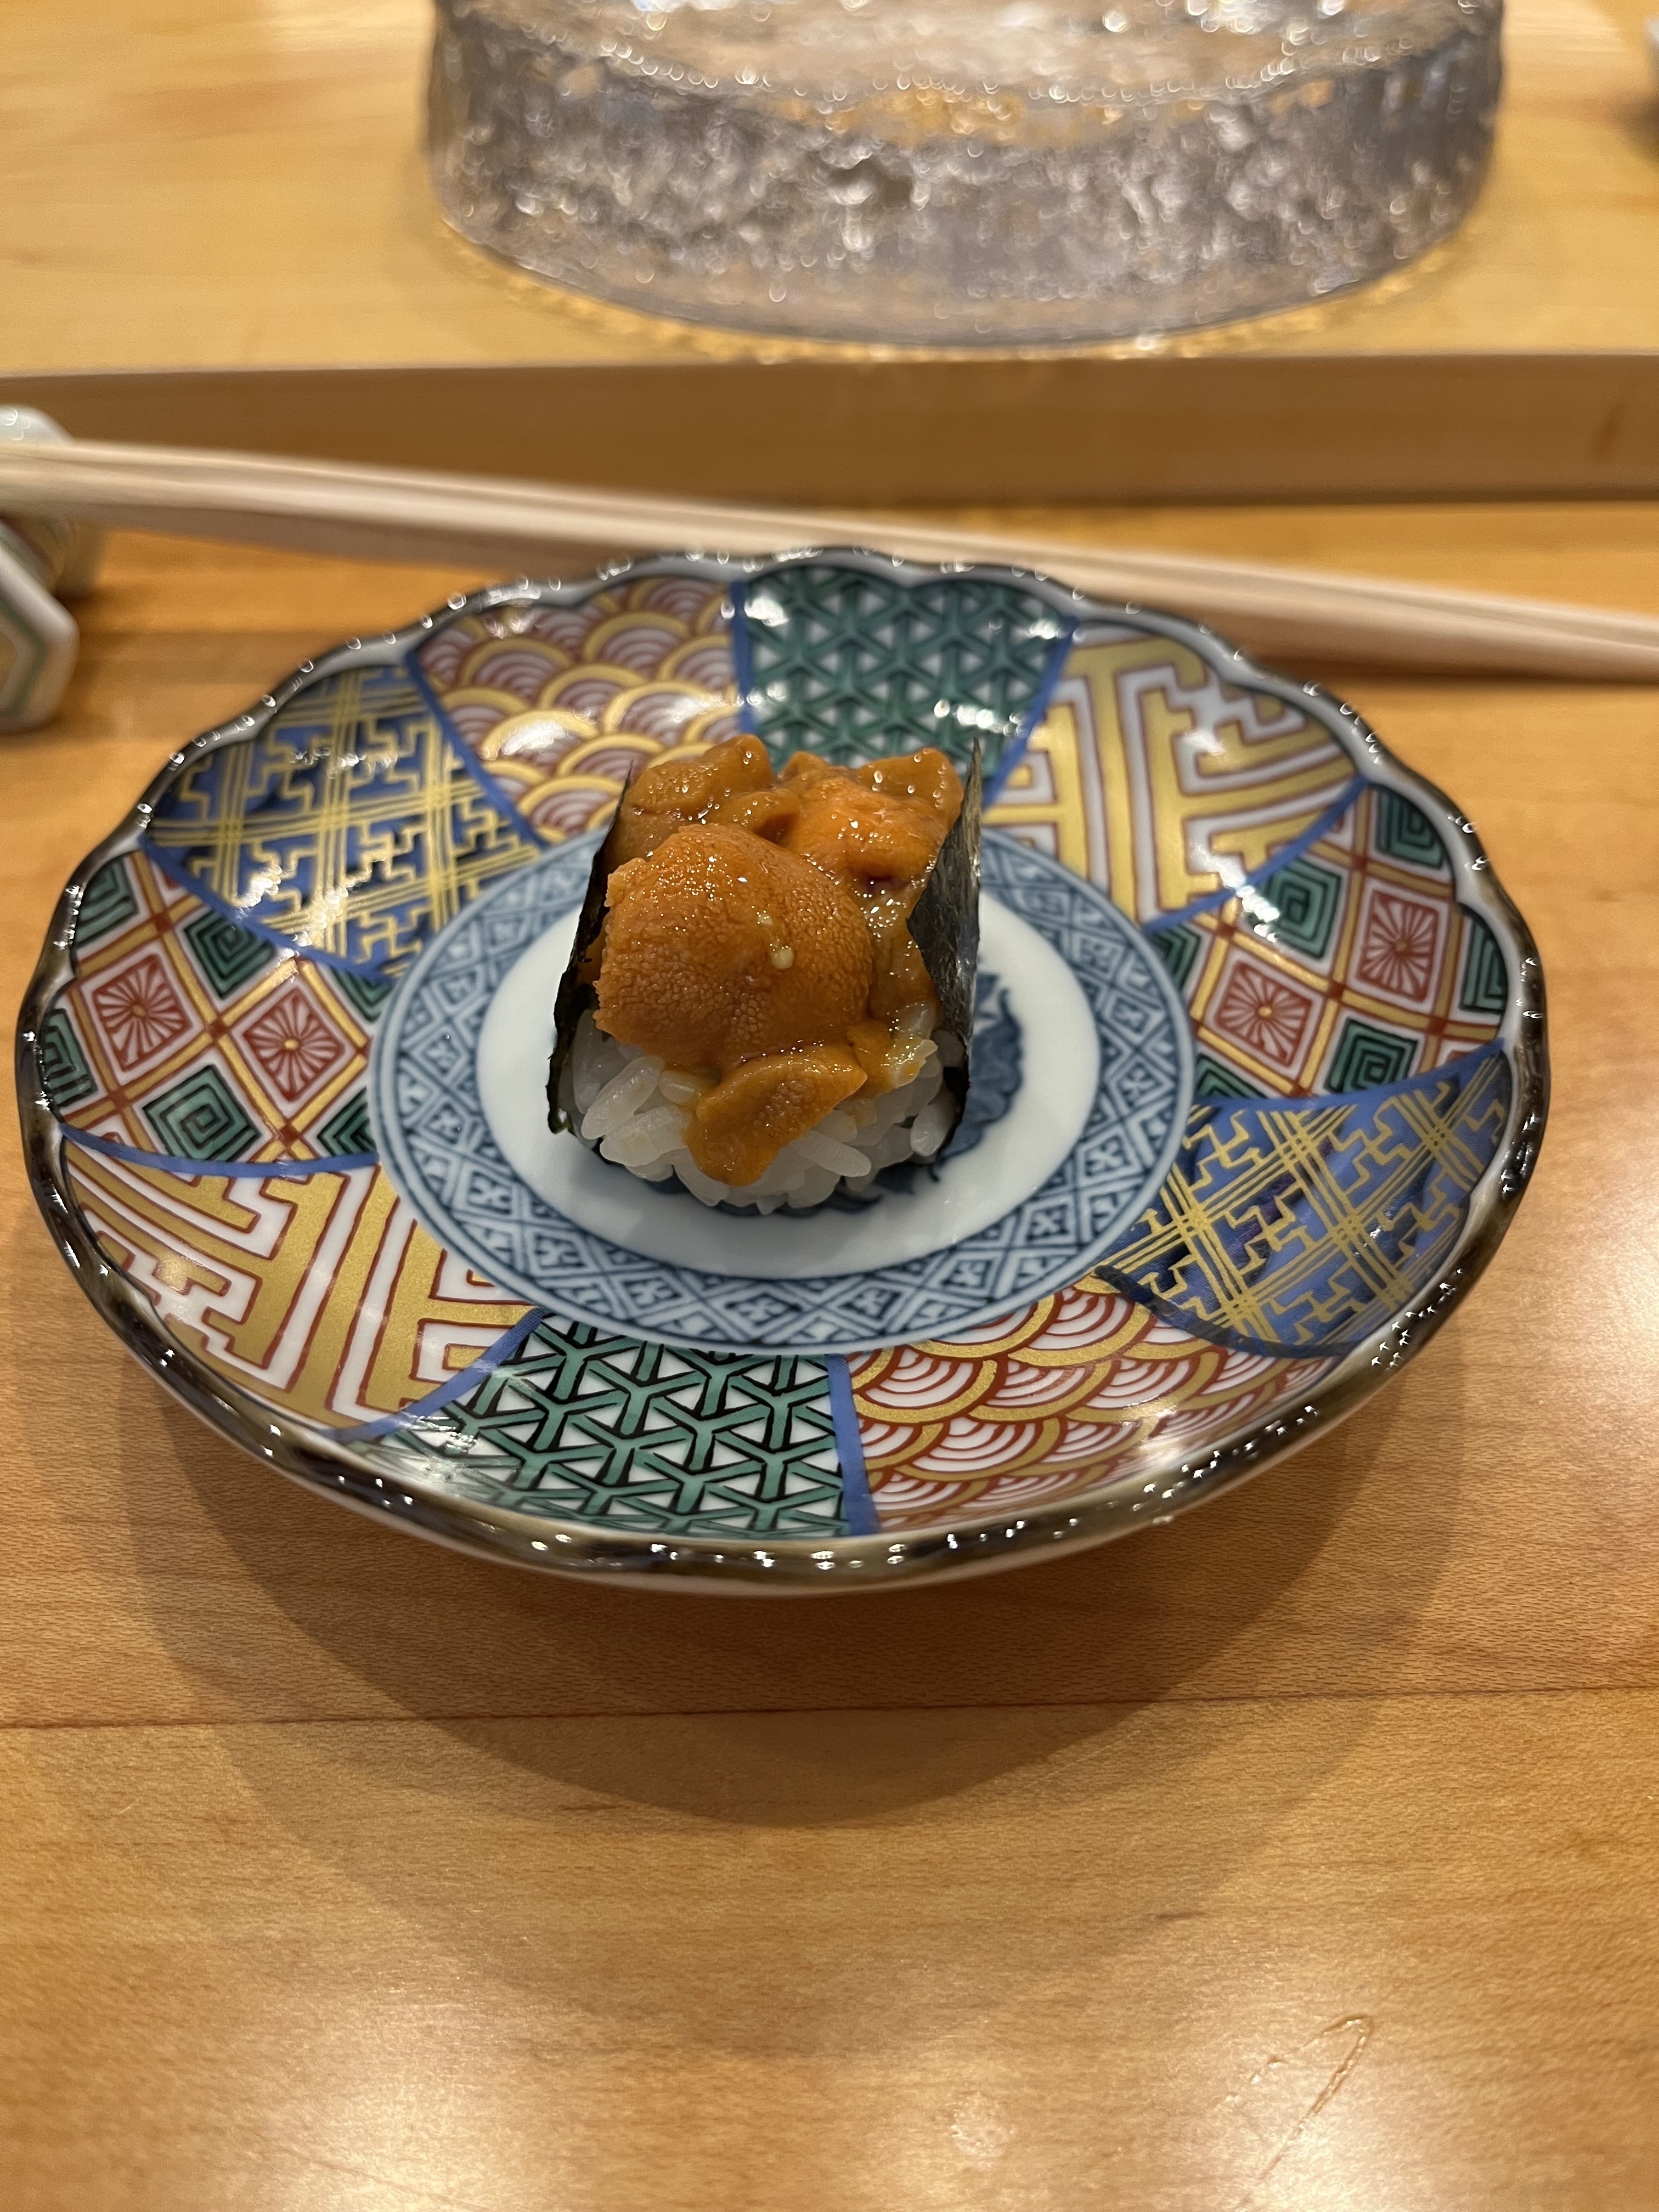 A piece of sushi on a plate.